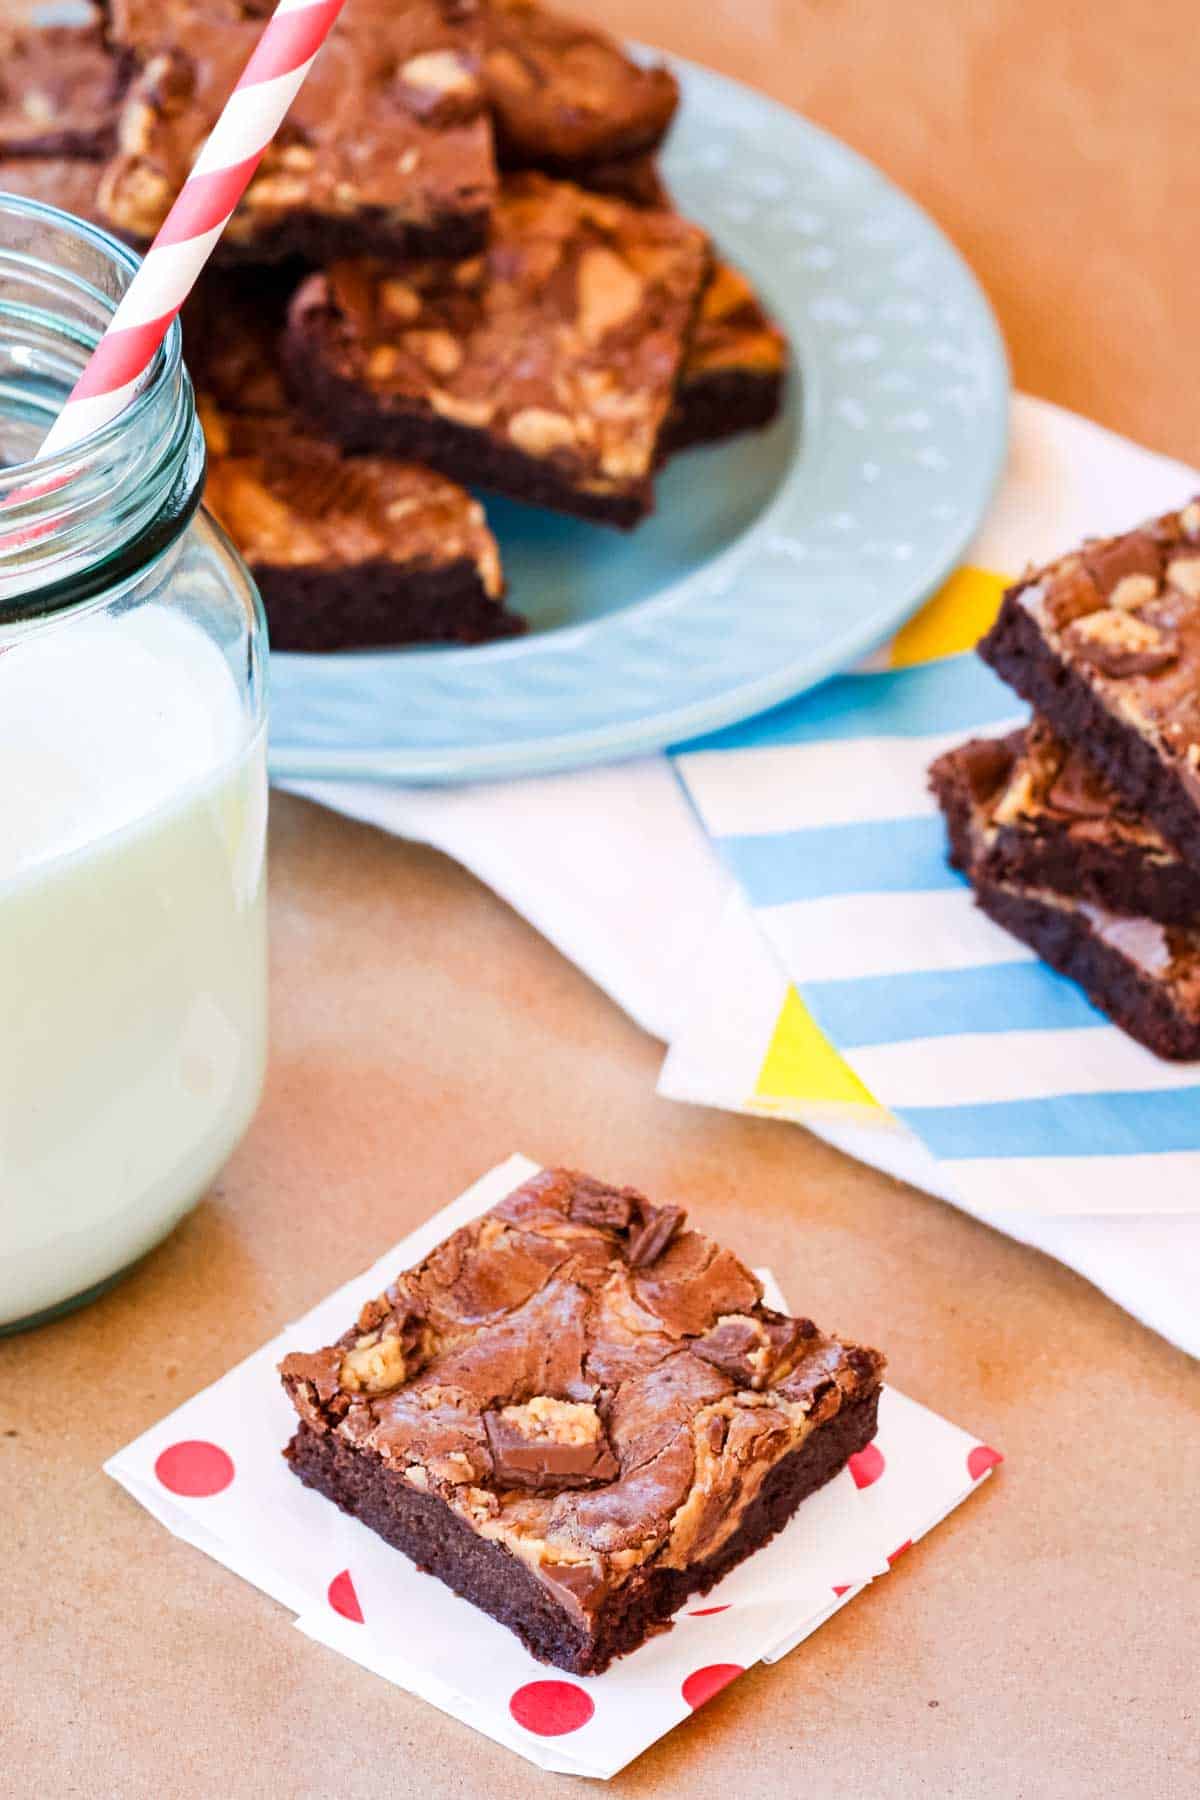 A peanut butter brownie on a white napkin with red polka dots, next to a glass of milk with more brownies on a plate in the background.